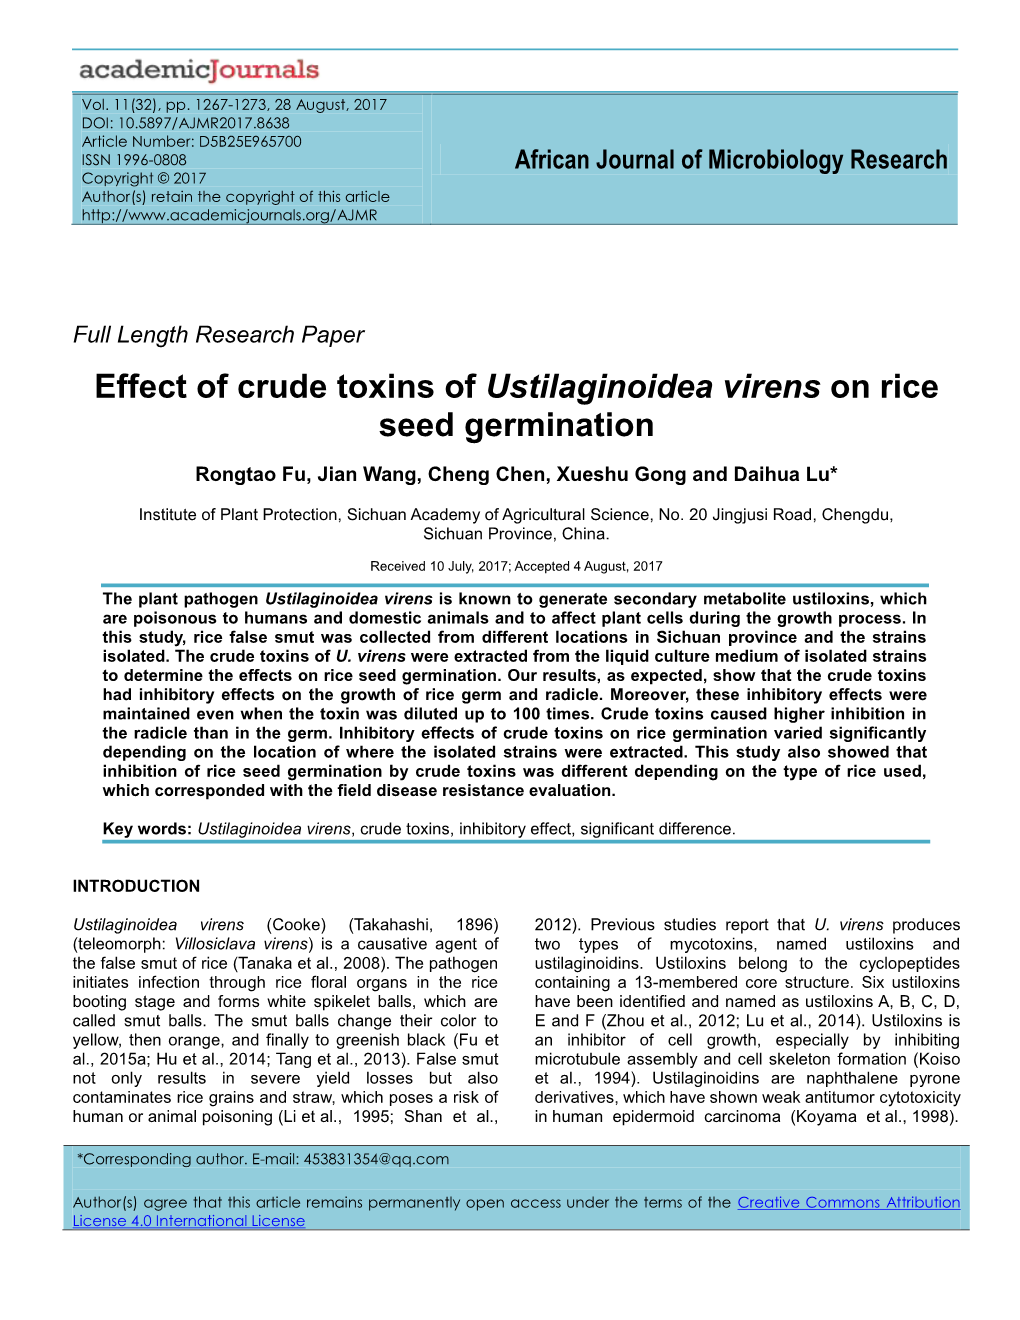 Effect of Crude Toxins of Ustilaginoidea Virens on Rice Seed Germination